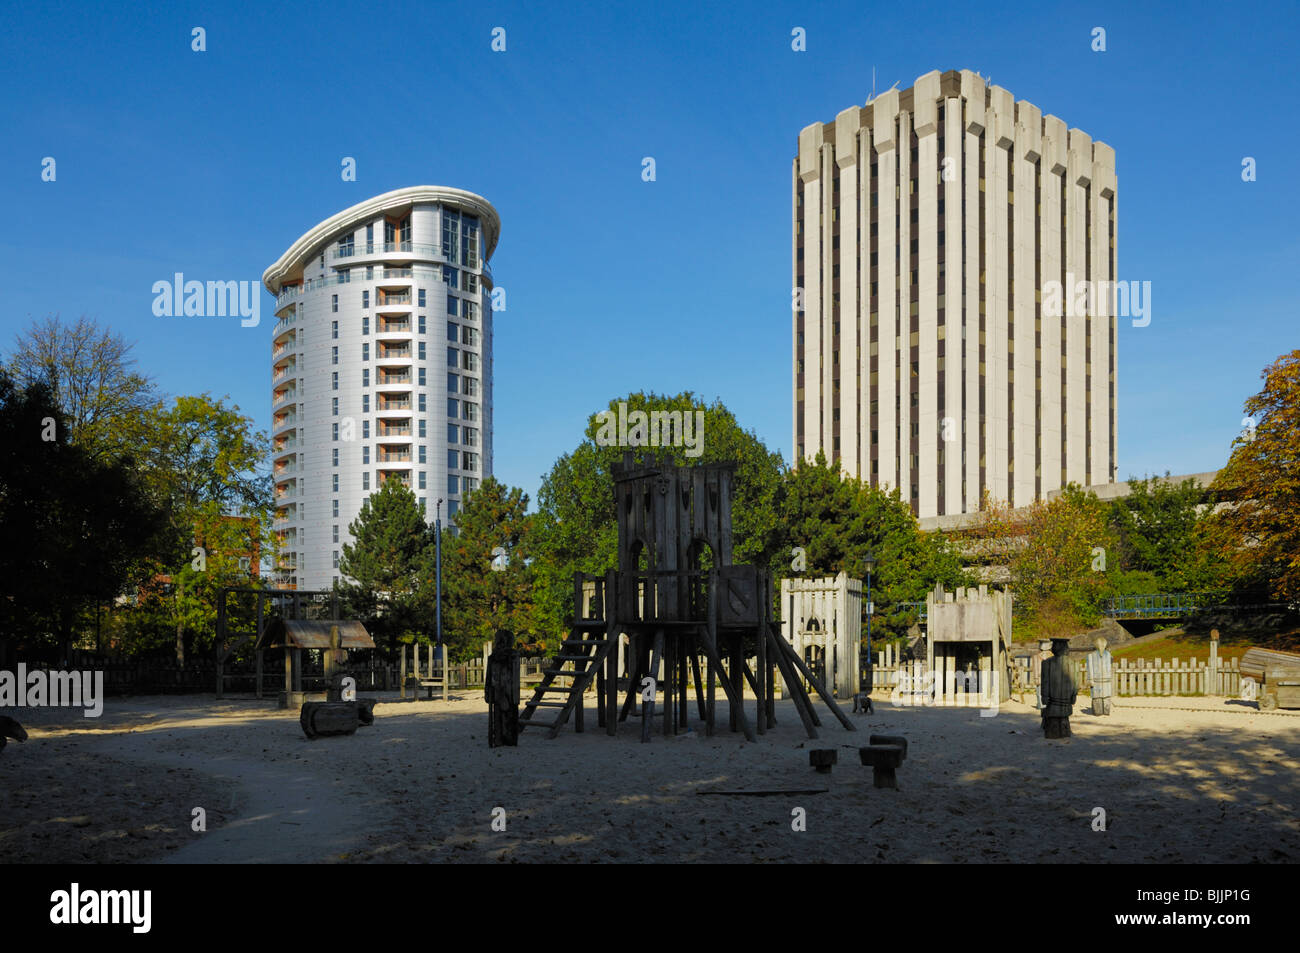 The Cabot Circus tower and an older office block overlooking the children's play area at Castle Park, Bristol, England. Stock Photo